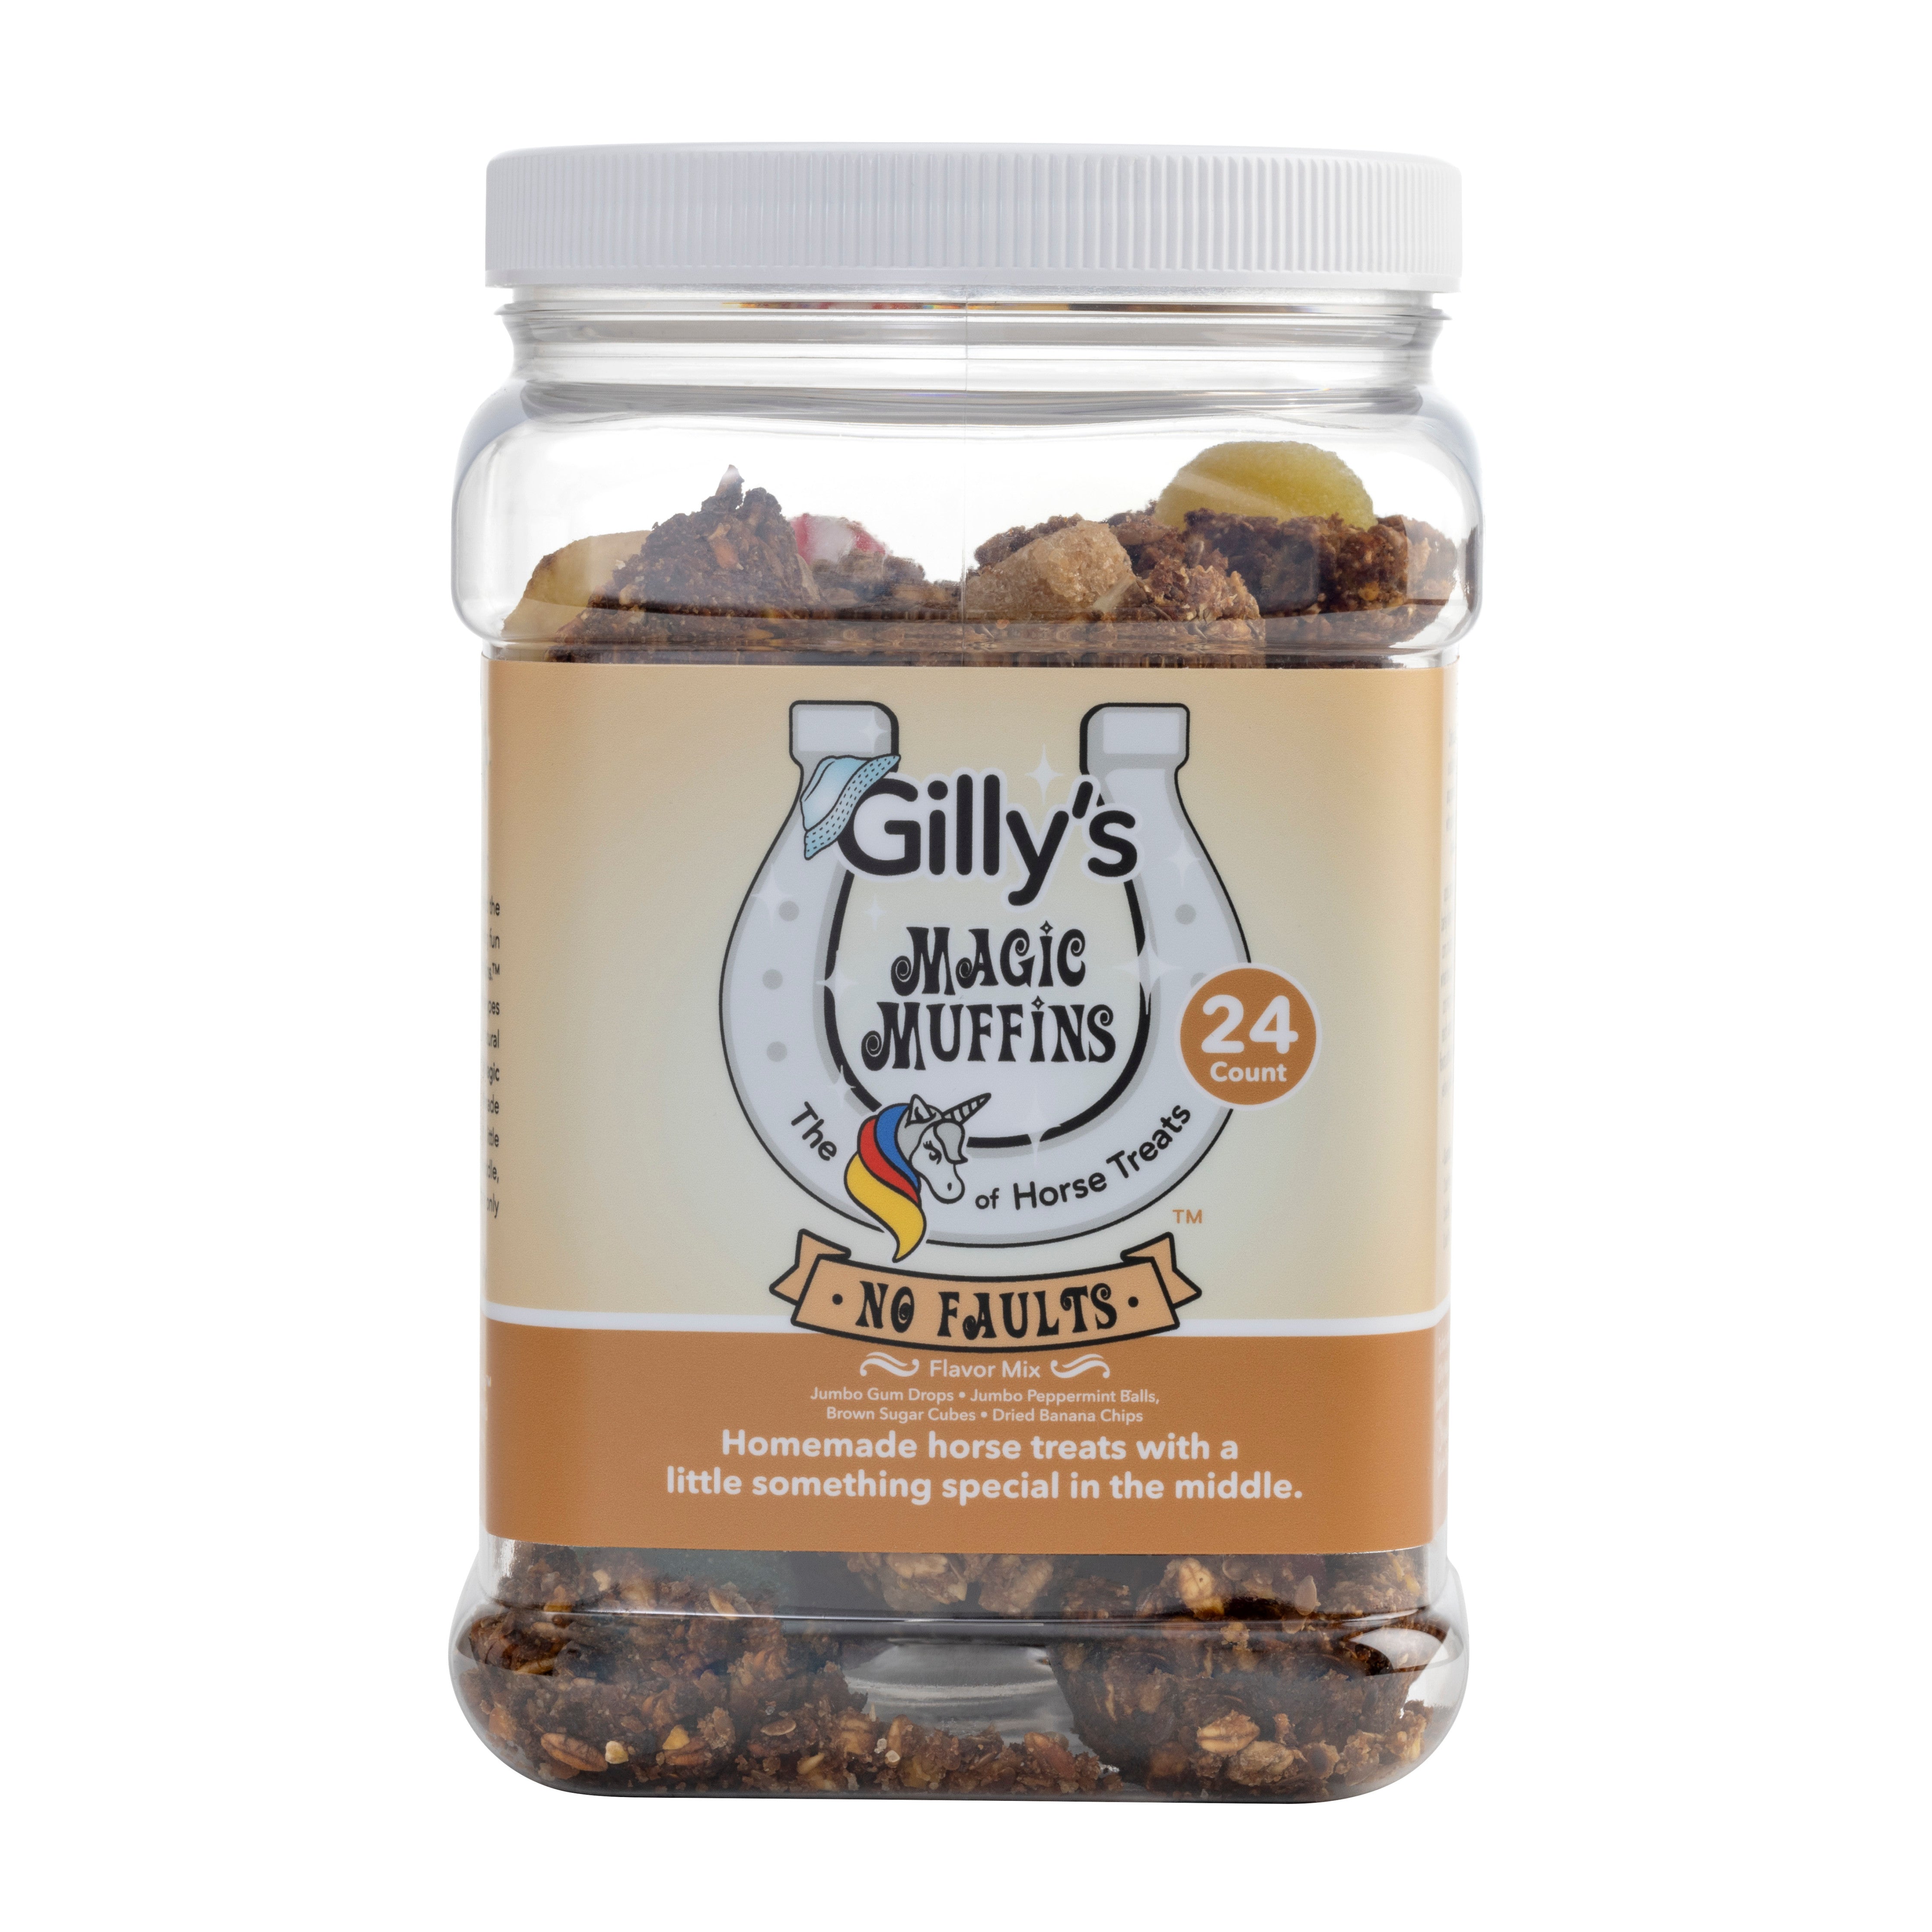 Gilly's Magic Muffins 24-ct jar